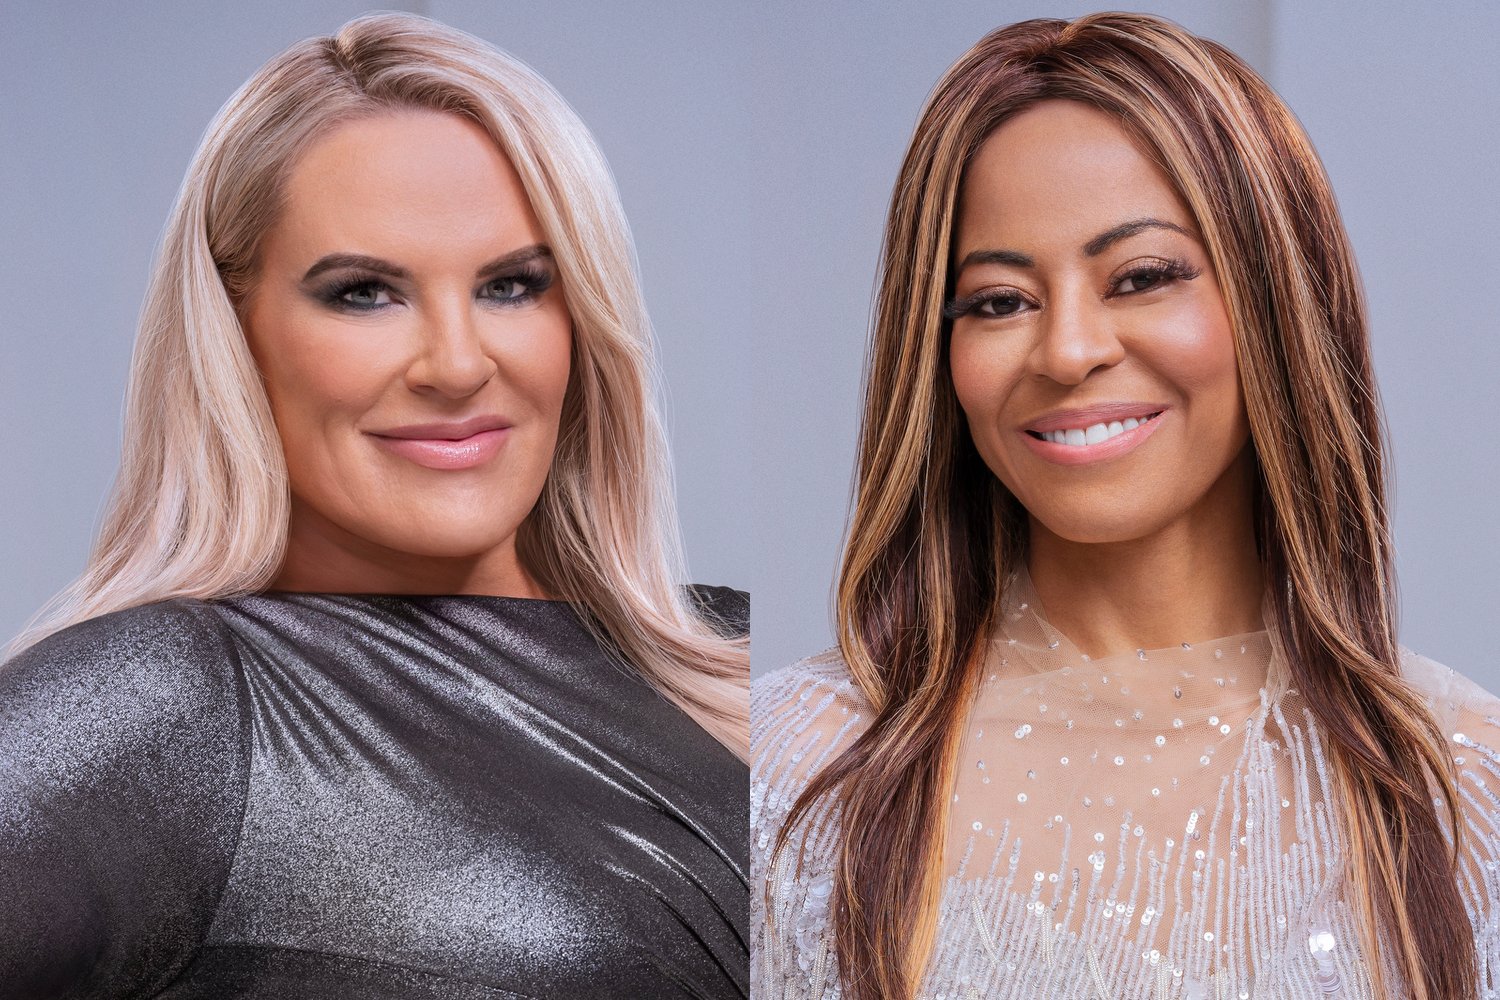 Heather Gay and Mary Cosby smiling in their 'RHOSLC' Season 1 official portraits